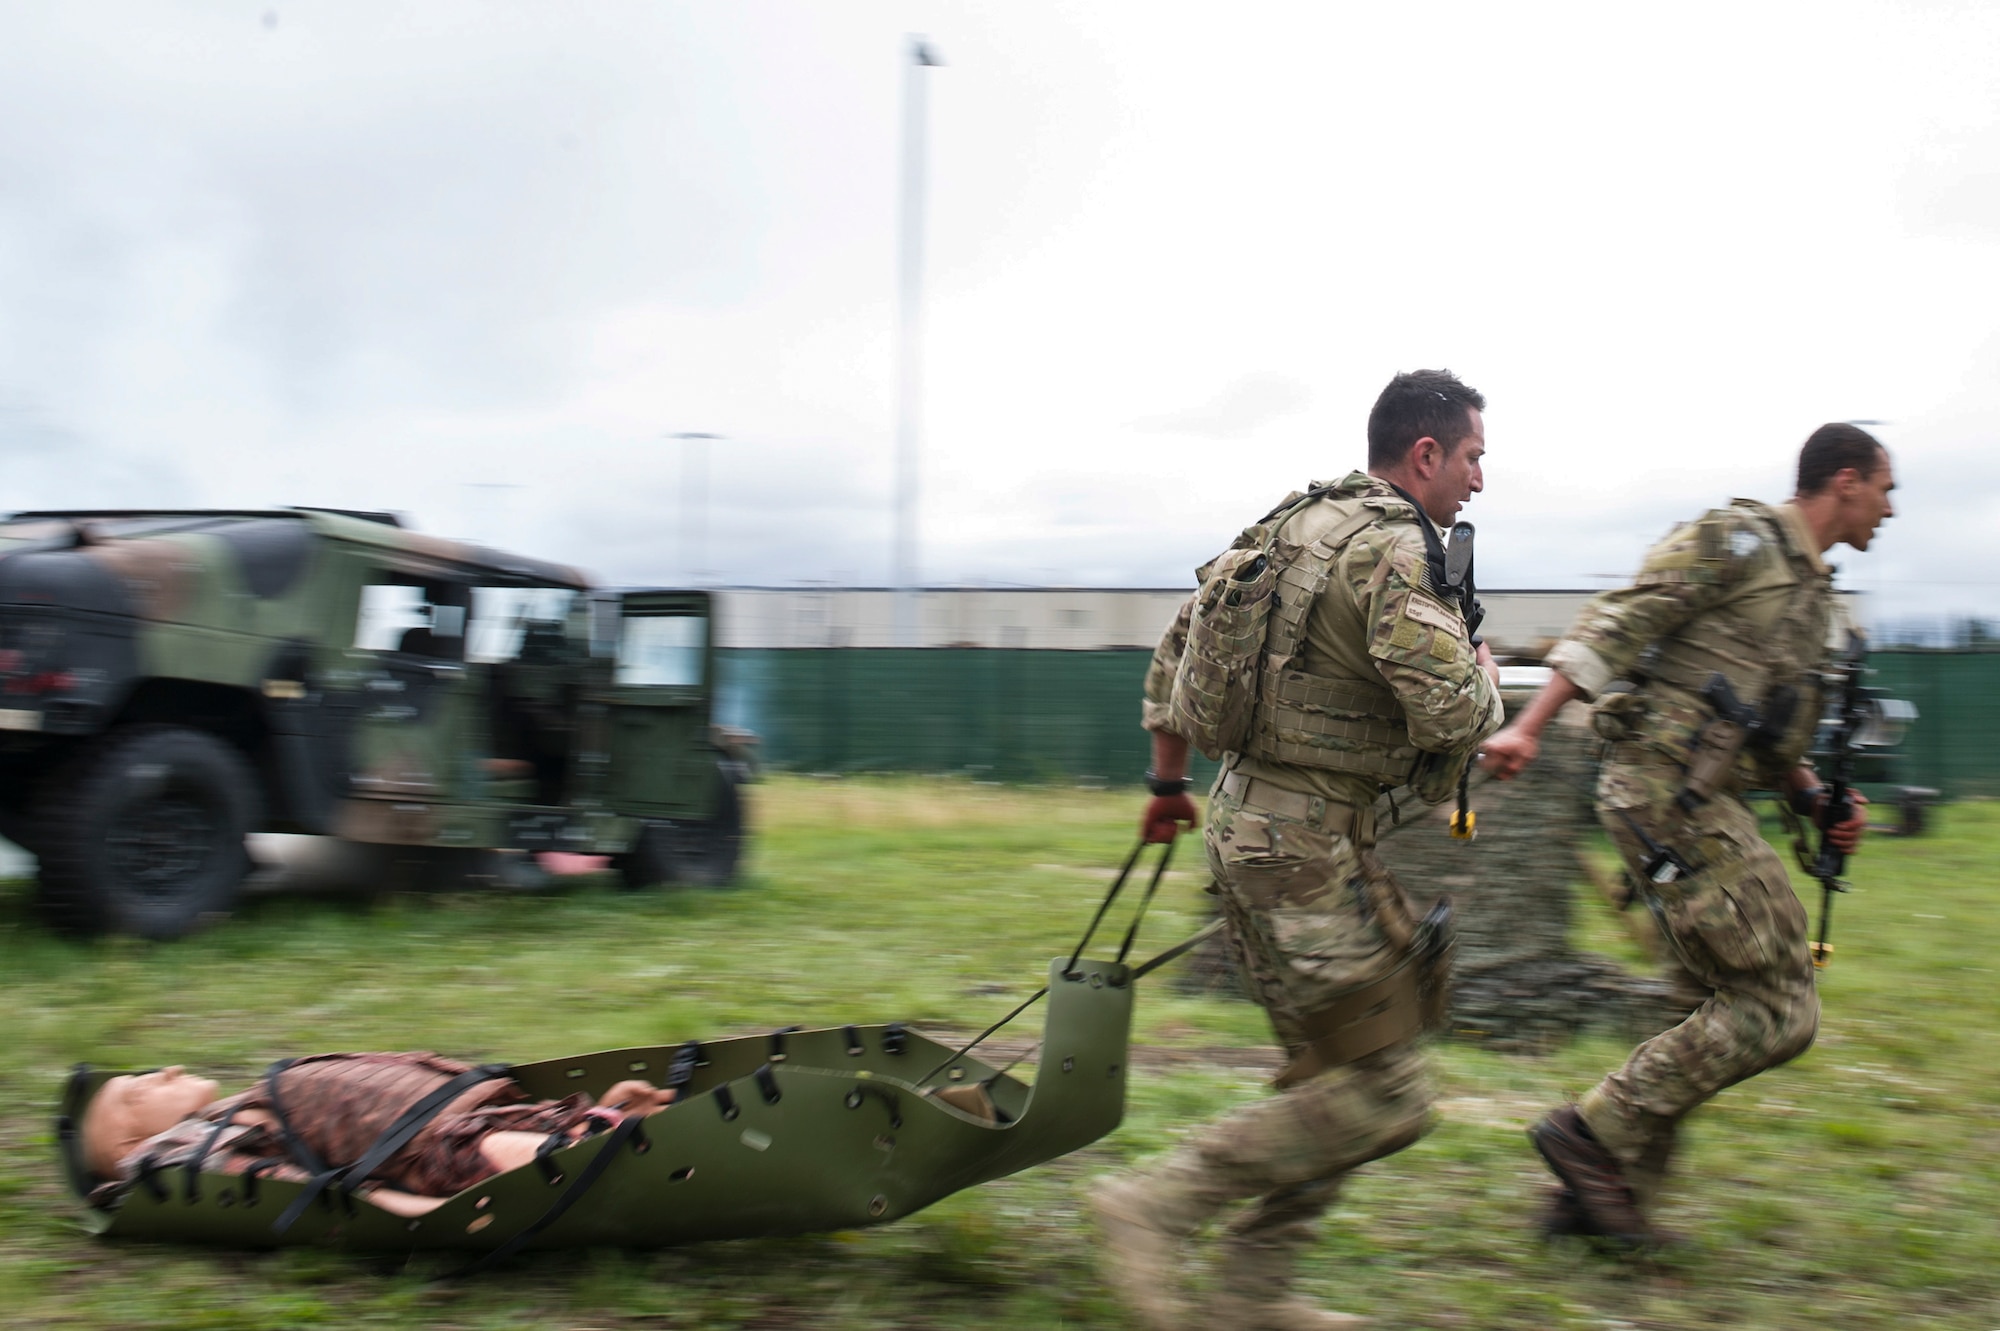 U.S. Air Force Staff Sgt. Kristopher Harpoon and Airman 1st Class Aaron Osbourne, 5th Air Support Operations Squadron, Joint Base Lewis-McChord, Wash., tactical air control party specialists, rescue a simulated victim from a damaged vehicle during the causality evacuation exercise as part of Cascade Challenge July 19, 2016, at Fort Wainright, Alaska. The competitors had to transport the casualty to safety while in a simulated firefight with enemy combatants. (U.S. Air Force photo by Airman Isaac Johnson)